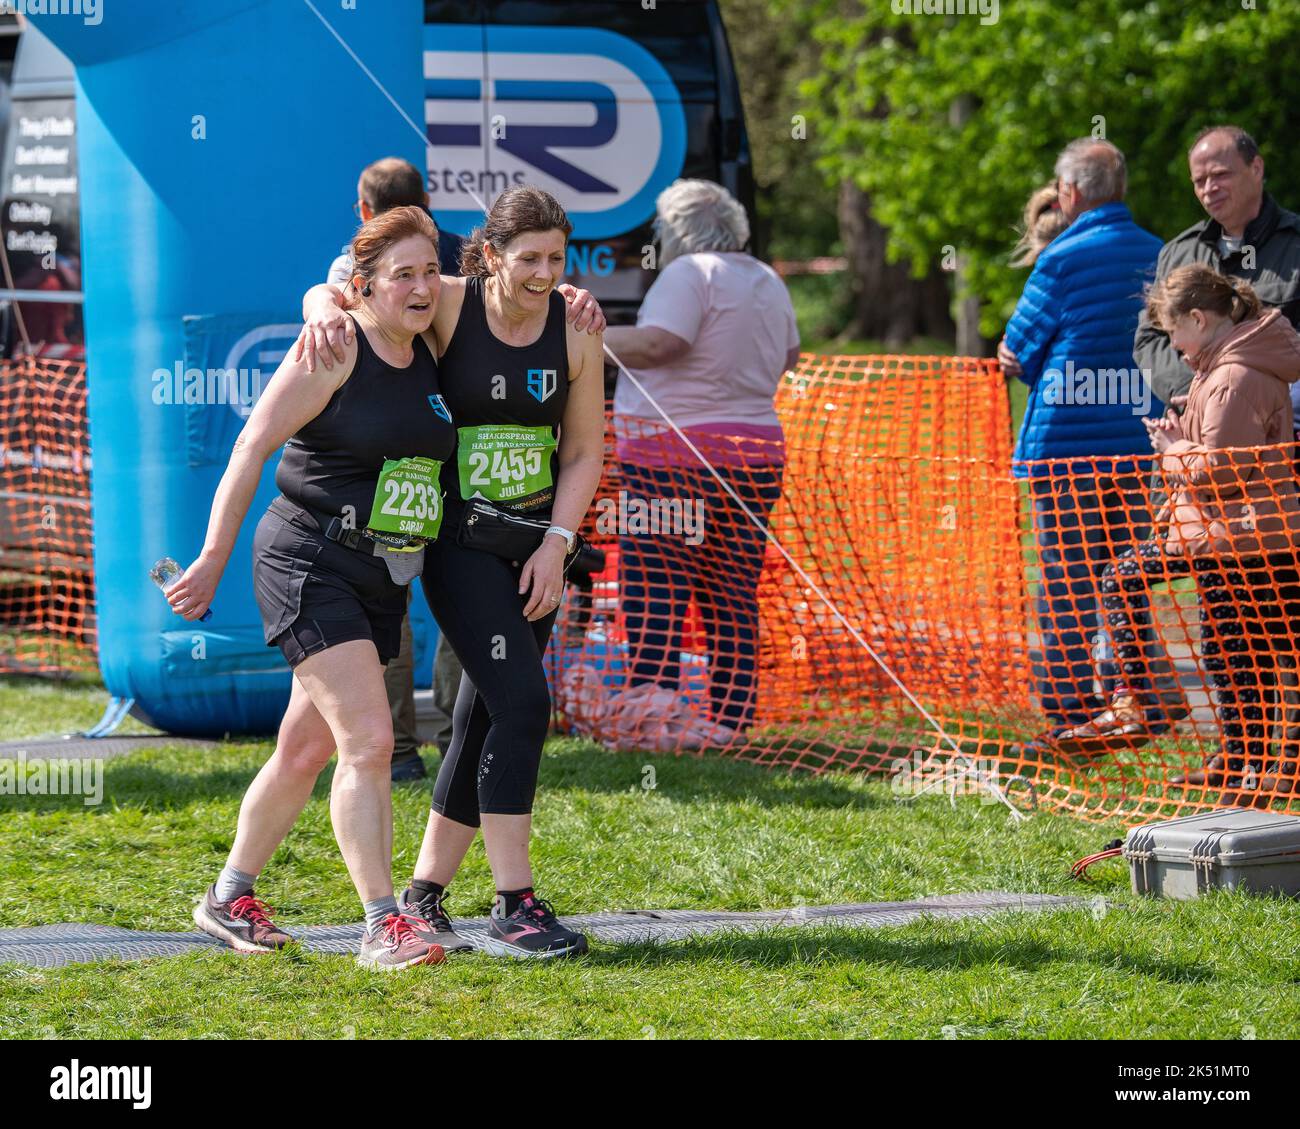 Shakespeare Marathon and Half Marathon. Exhausted but happy women runners helping each other at the finish line. Stock Photo